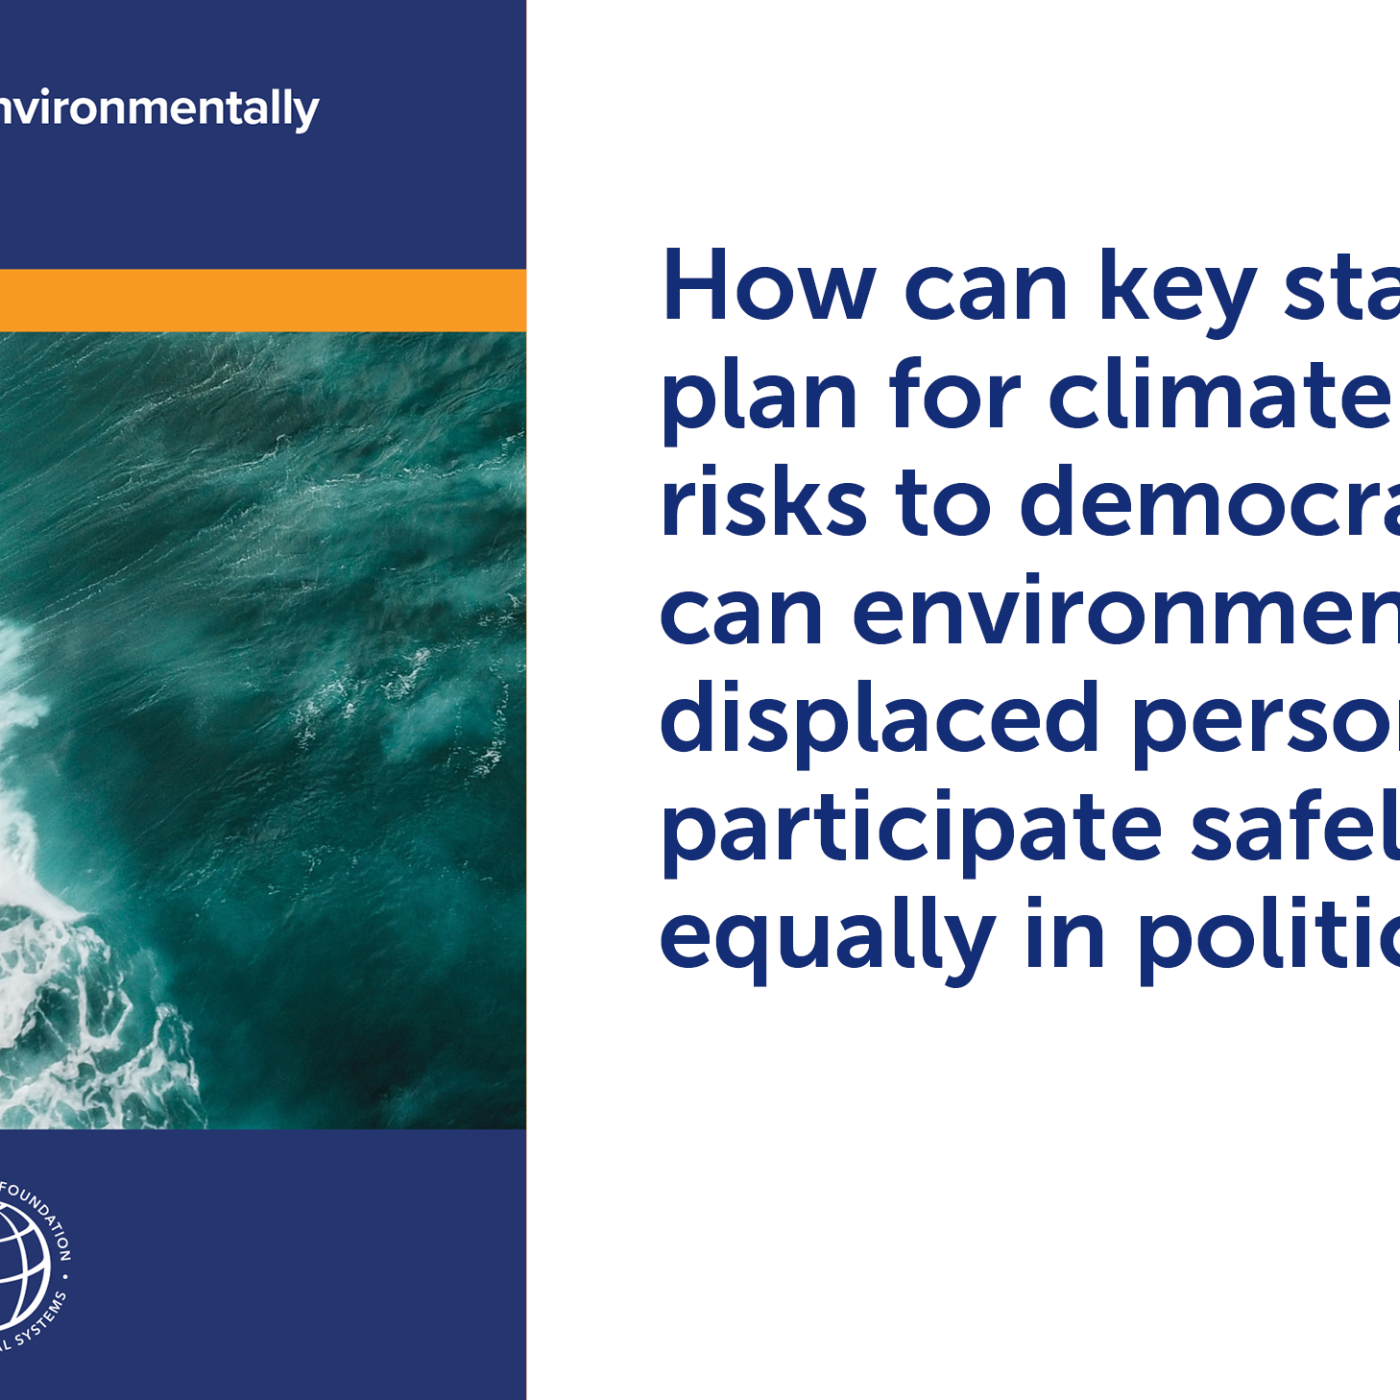 Electoral Rights of Environmentally  Displaced Persons cover + "How can key stakeholders plan for climate-related risks to democracy? How can environmentally displaced persons participate safely and equally in political life?"